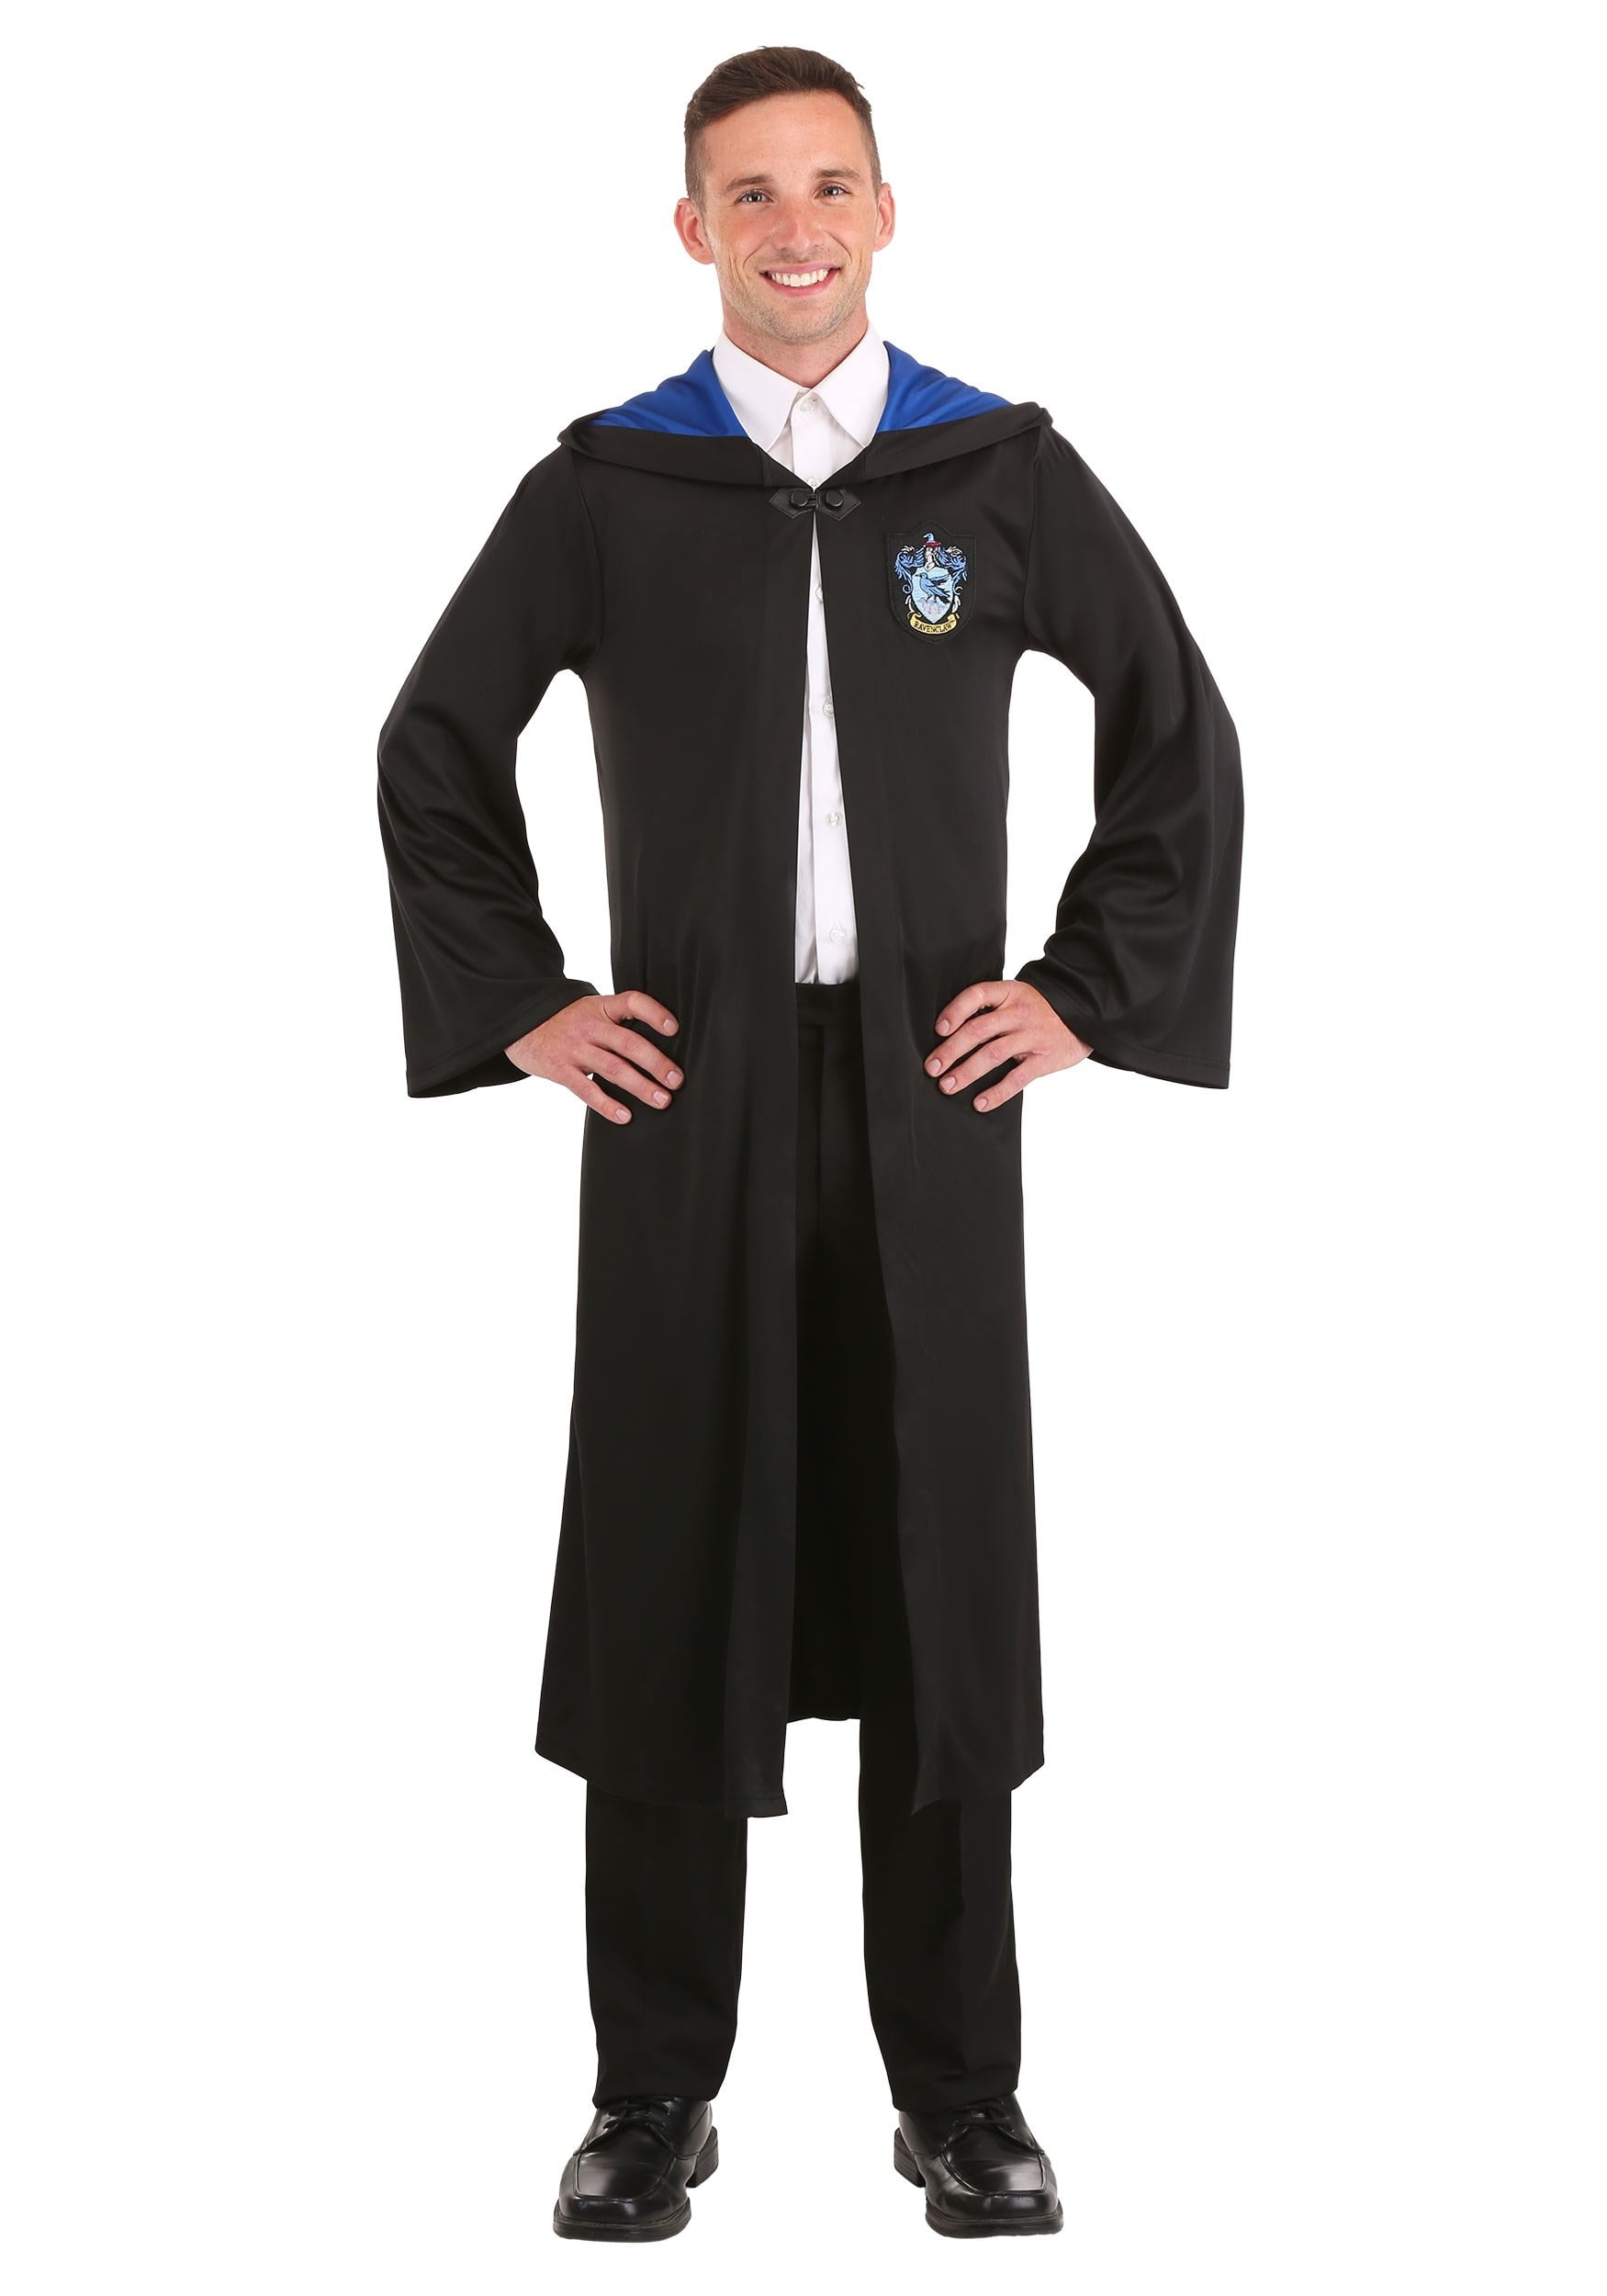 Harry Potter Ravenclaw Robe Adult Costume